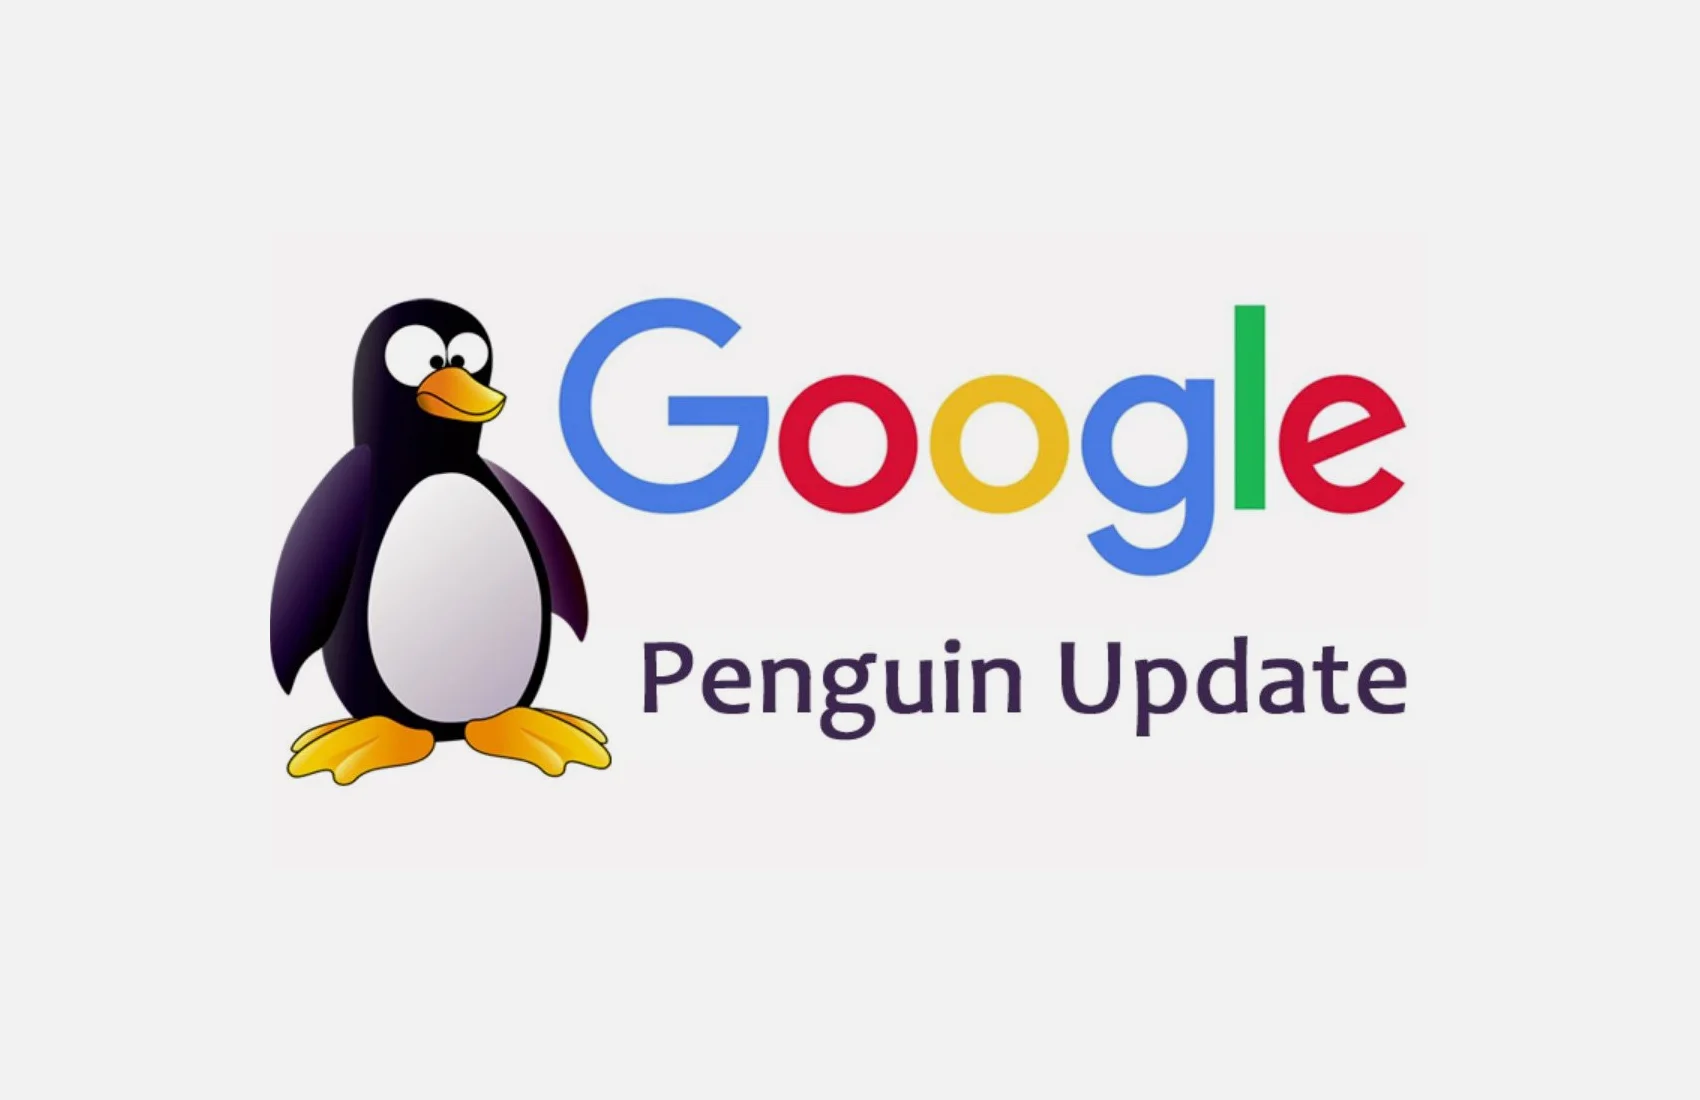 Google Penguin Update: Why? How? When? How To?